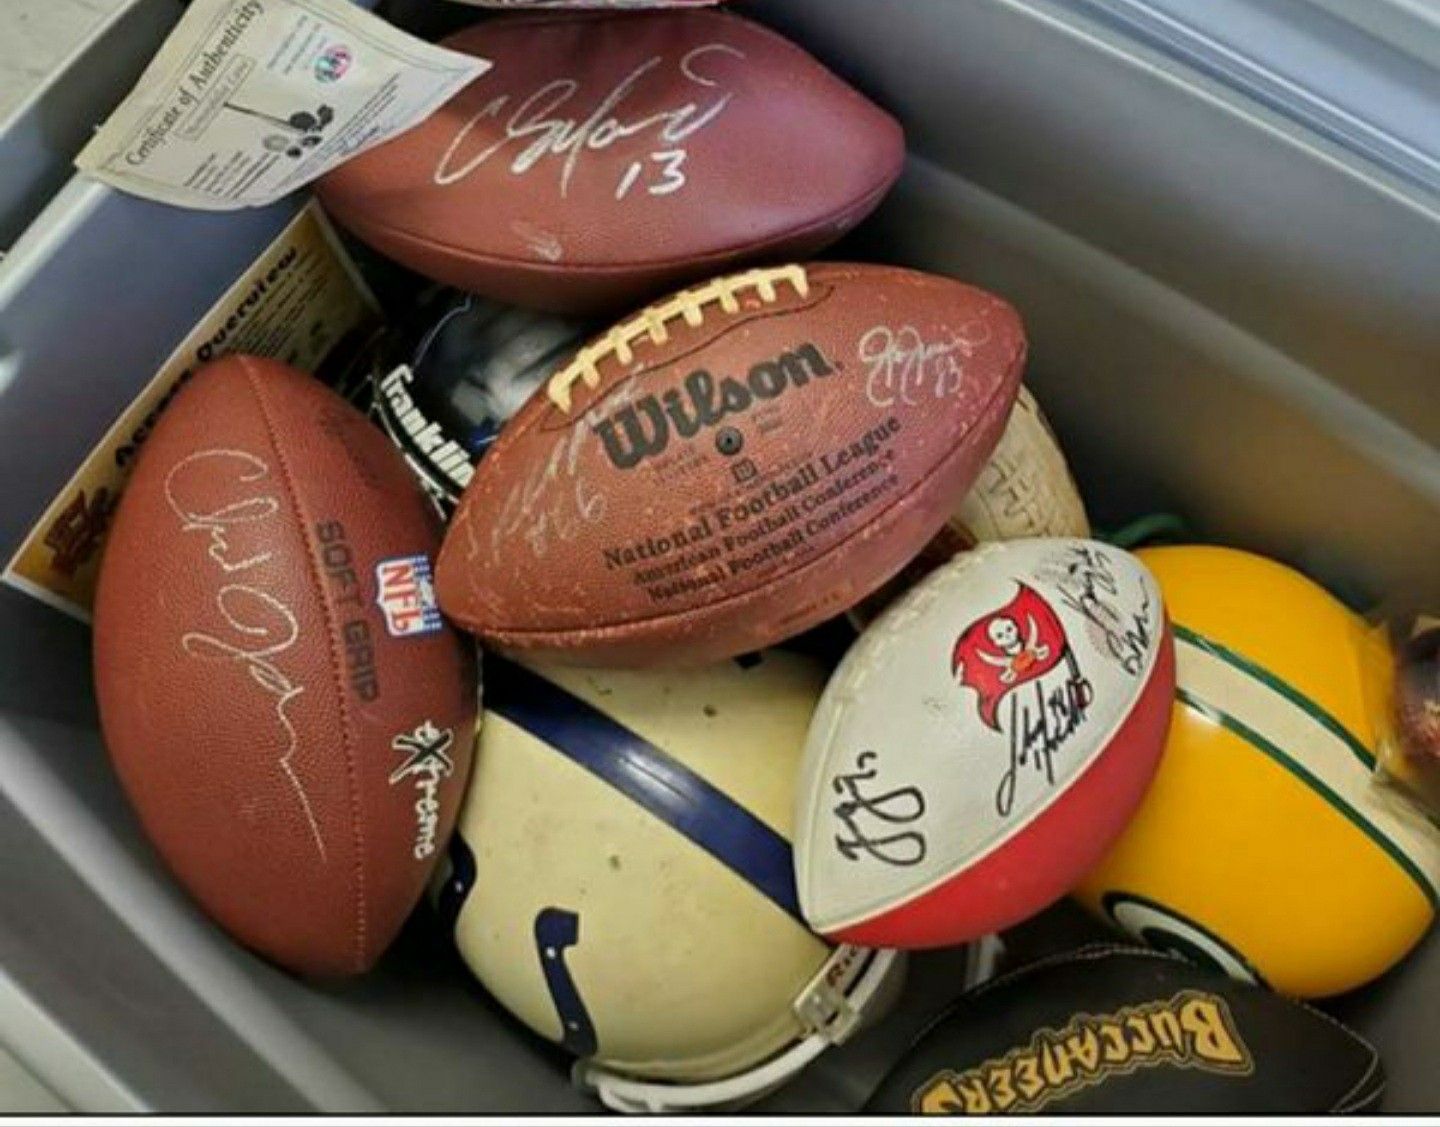 SIGNED SPORTS COLLECTABLES. HELMETS, FOOTBALLS, BASEBALLS, JERSEYS. TONS OF BASEBALL CARDS AND OTHER SPORTS CARDS